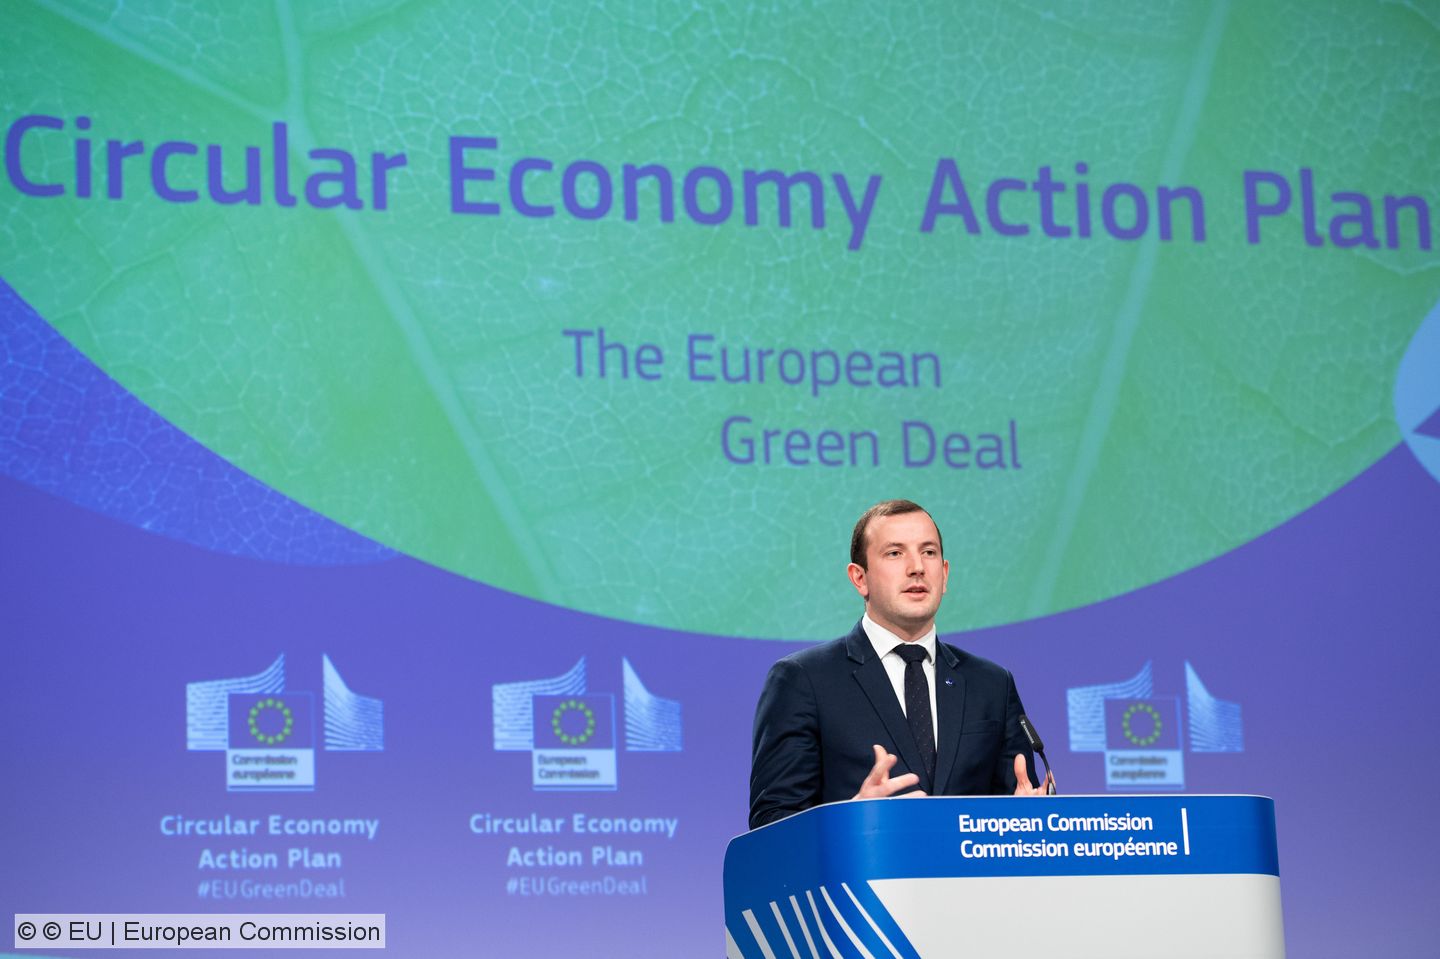 New action plan for the circular economy